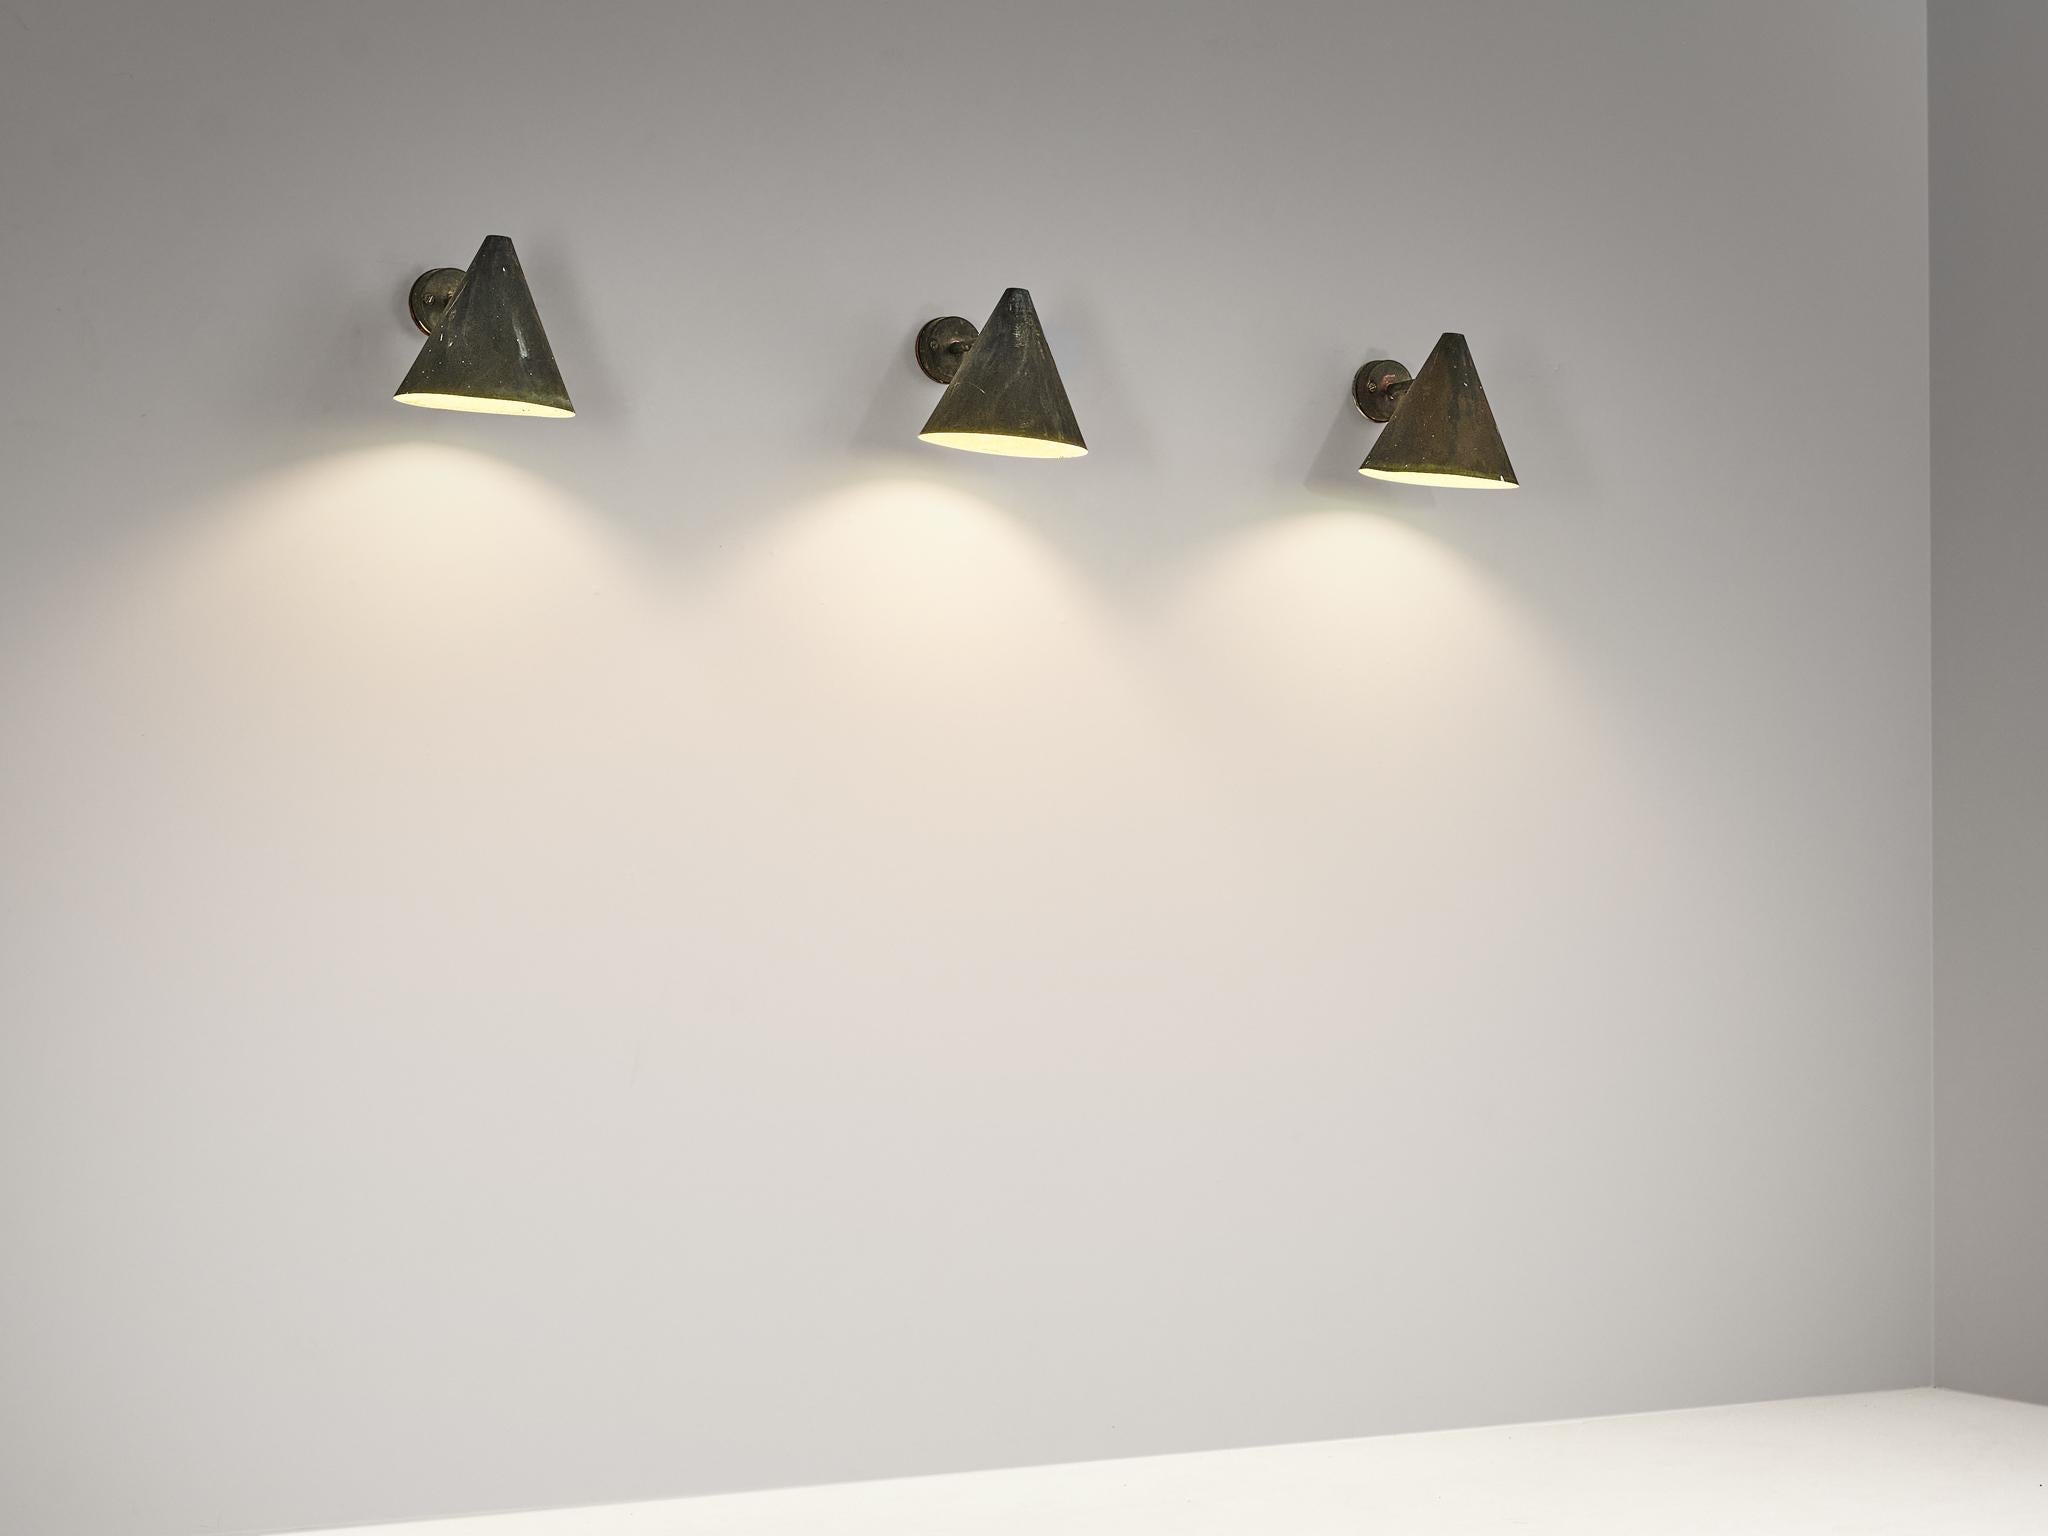 Hans-Agne Jakobsson 'Tratten' Wall Lights in Patinated Copper 2